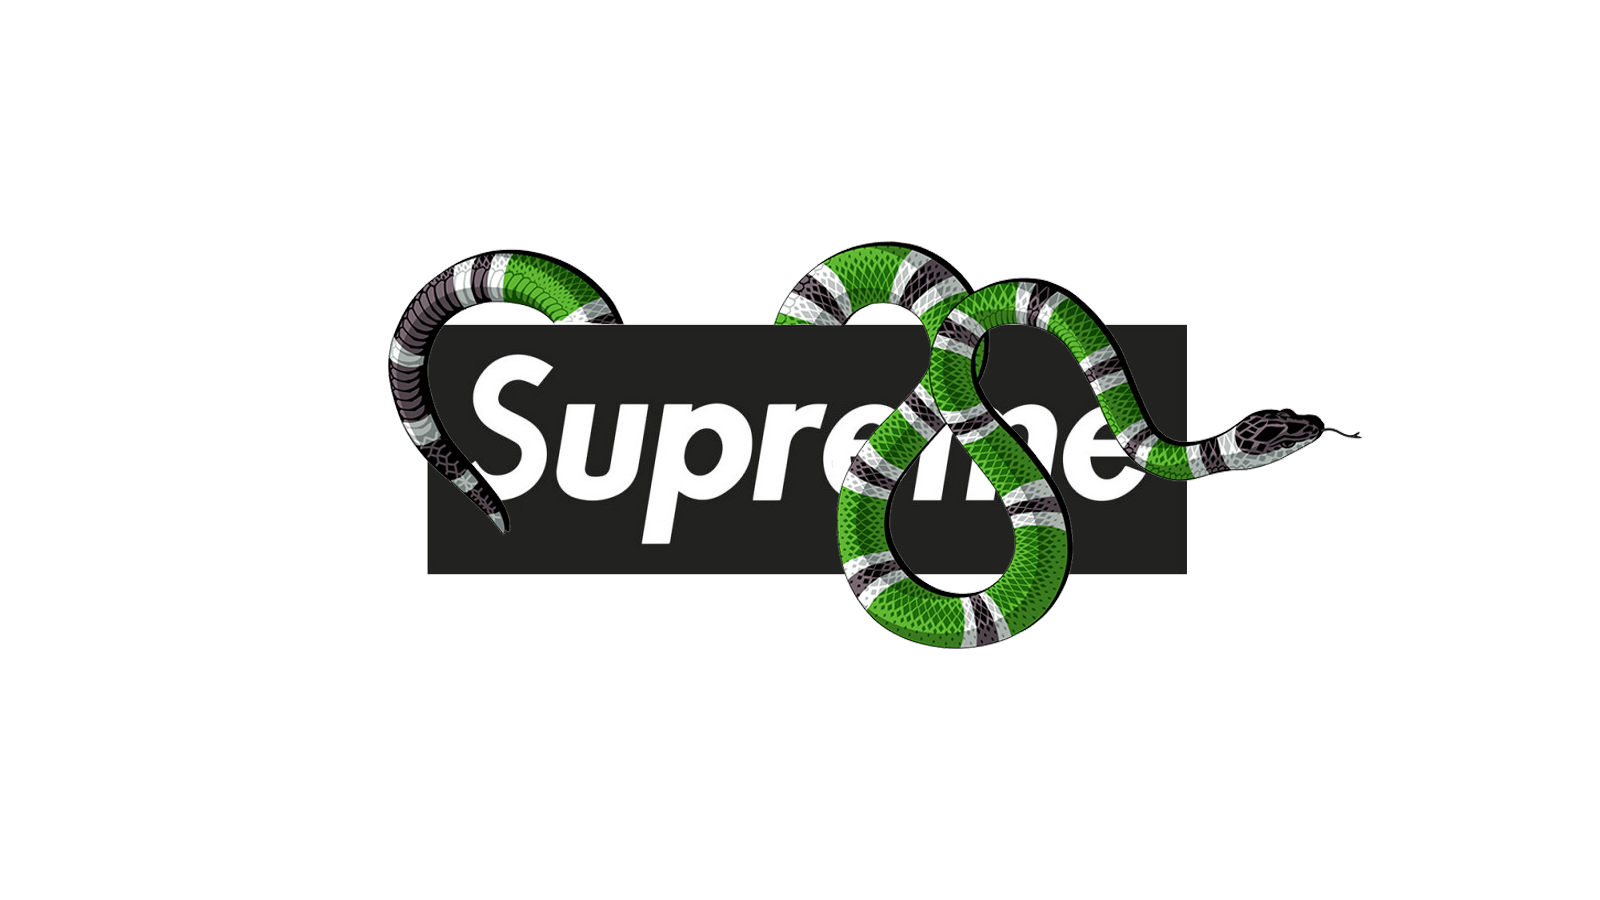 gucci x supreme collab inspired by post on front page the other